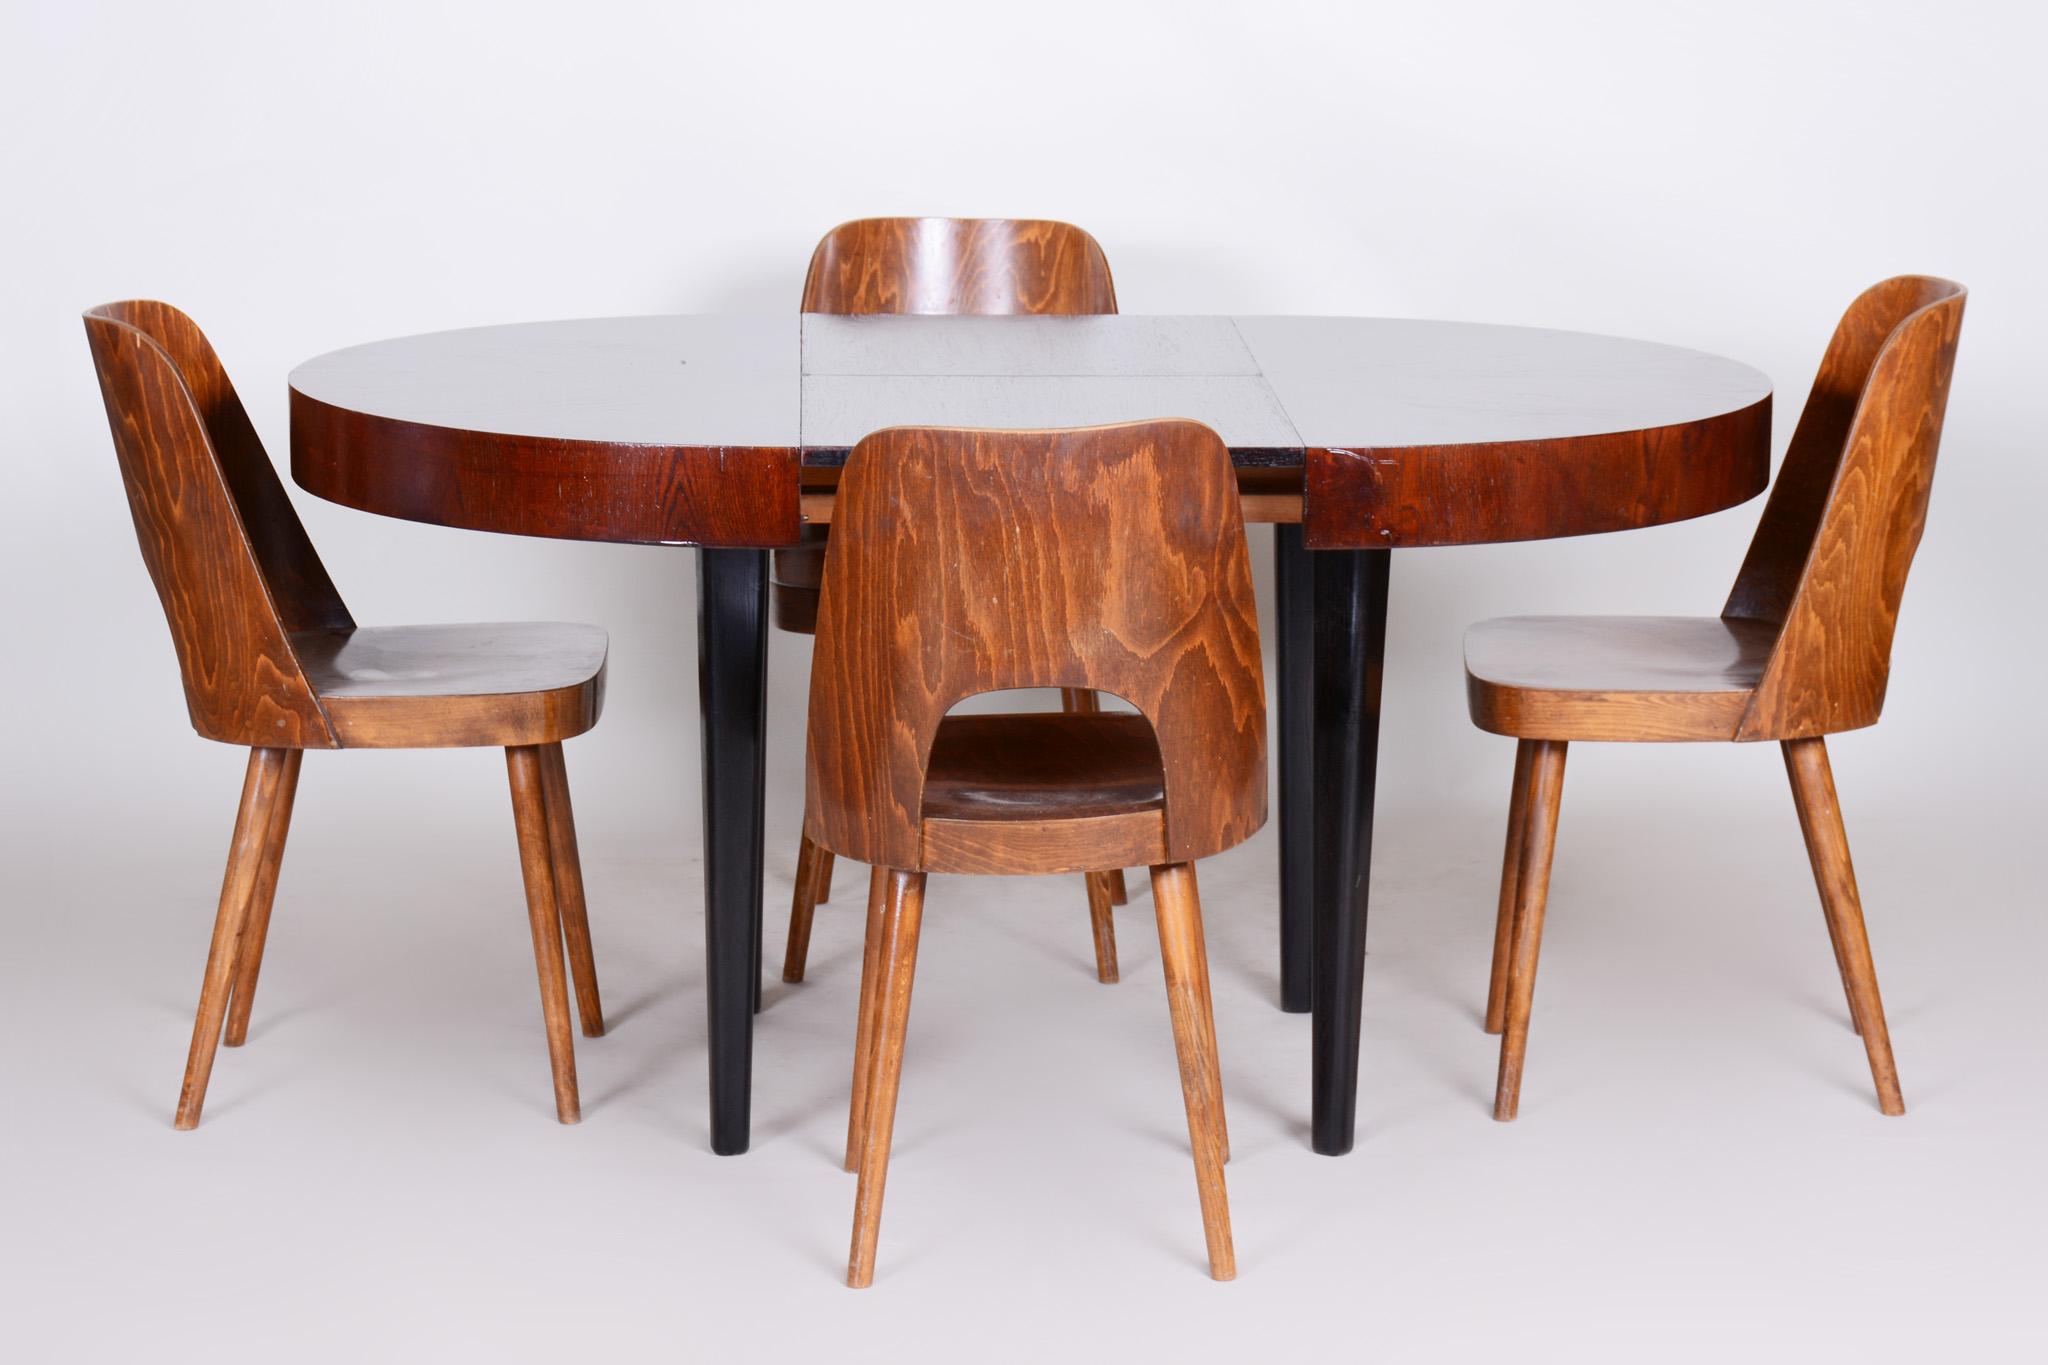 Fully Restored Art Deco Dining Table Made in the 1940s in Czechia, Beech and Oak 7